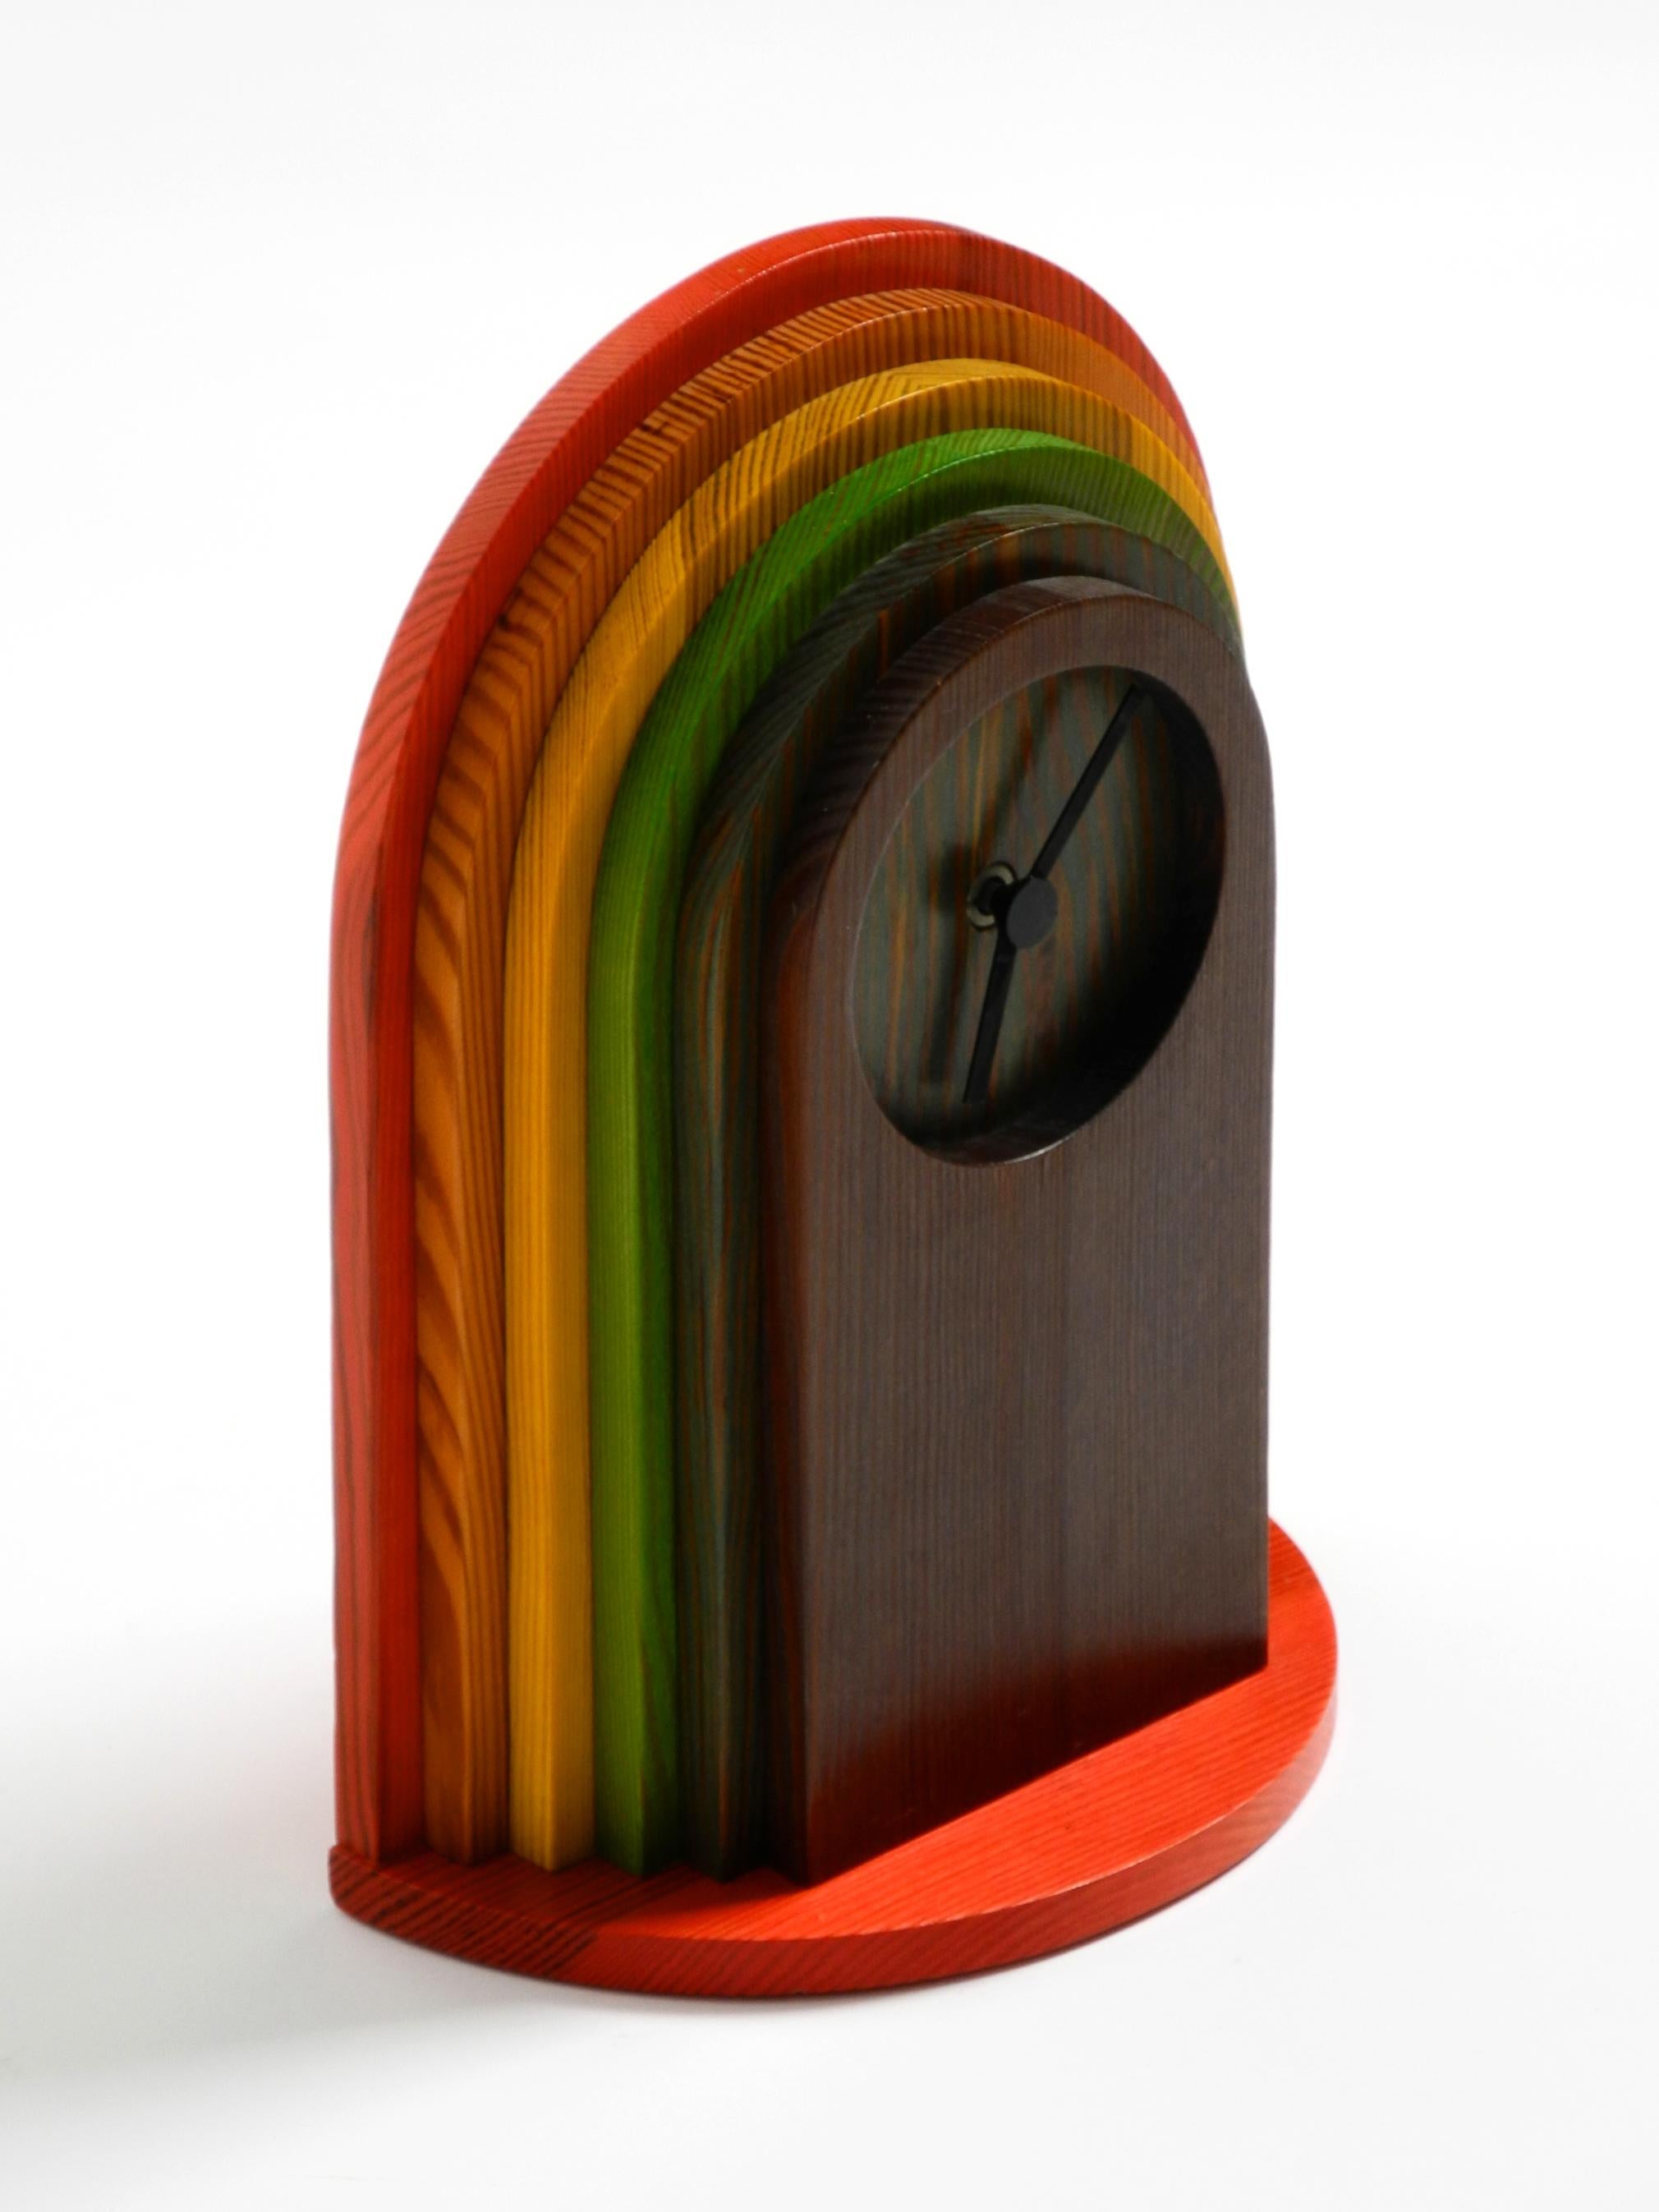 1980s, Colorful Pine Wood Table Clock in Postmodern Design by Legnomagia Italy 11